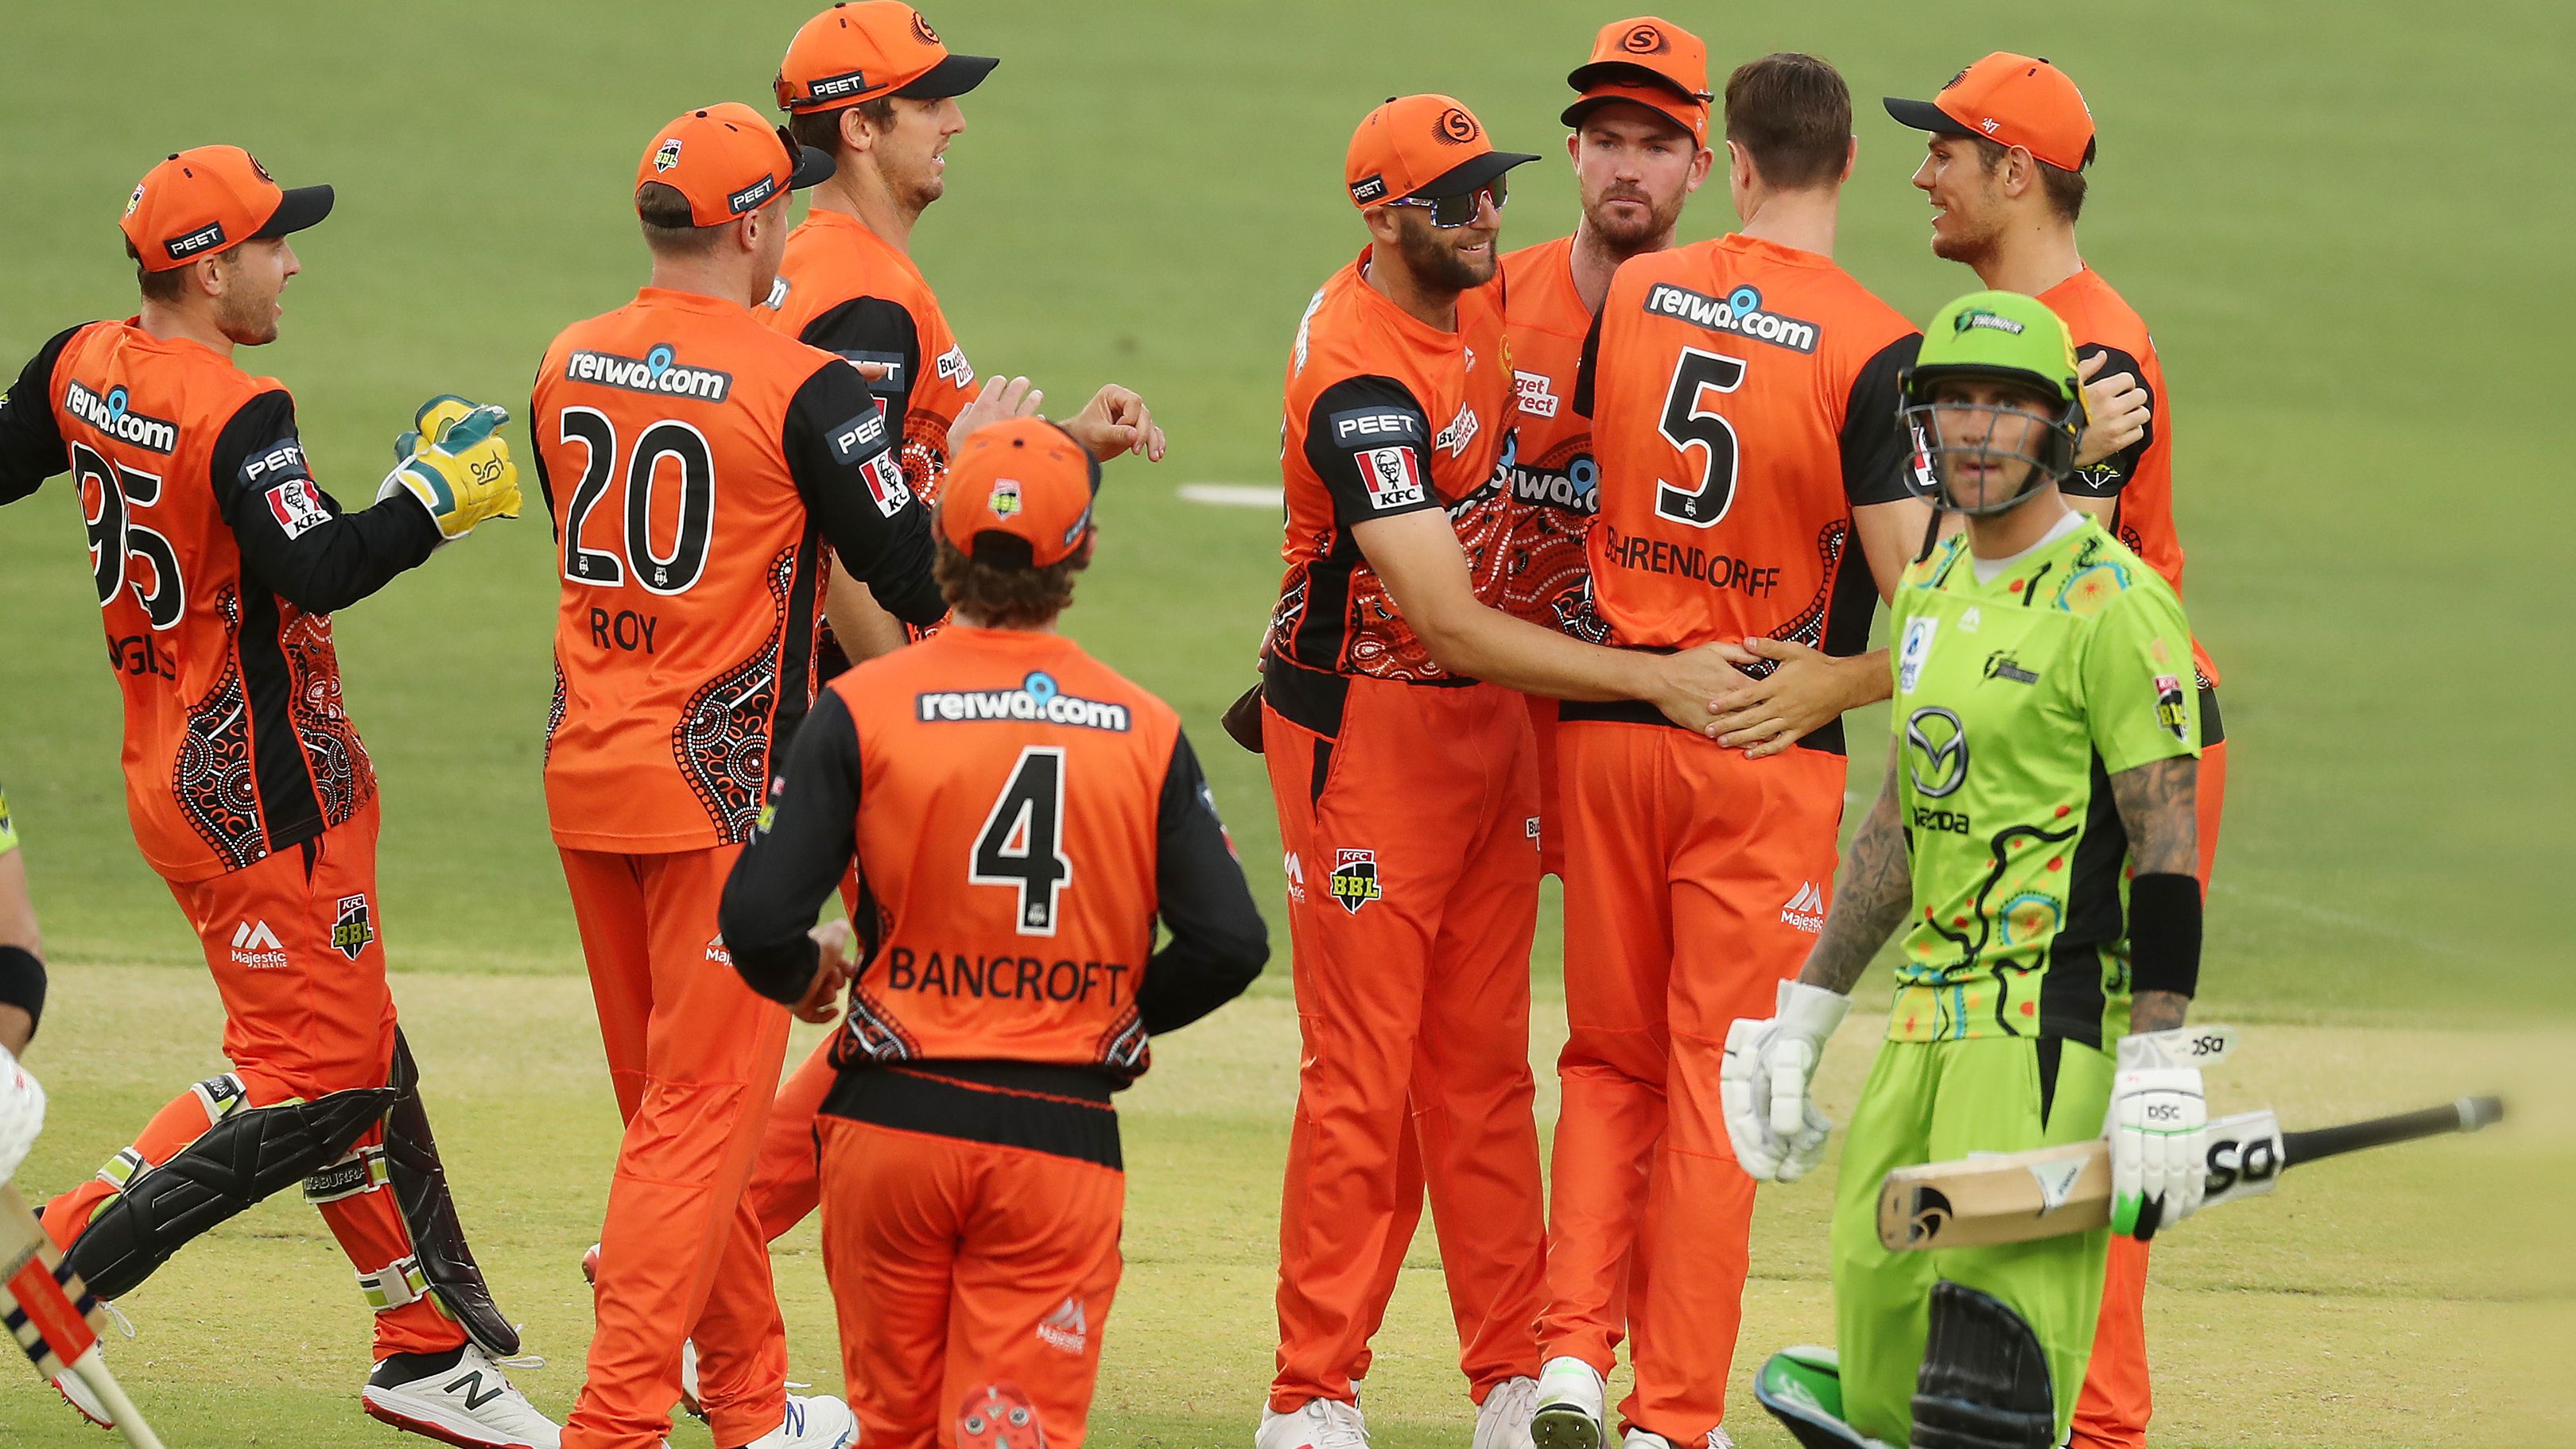 Andrew Tye of the Scorchers  celebrates after taking a catch to dismiss Callum Ferguson of the Thunder.